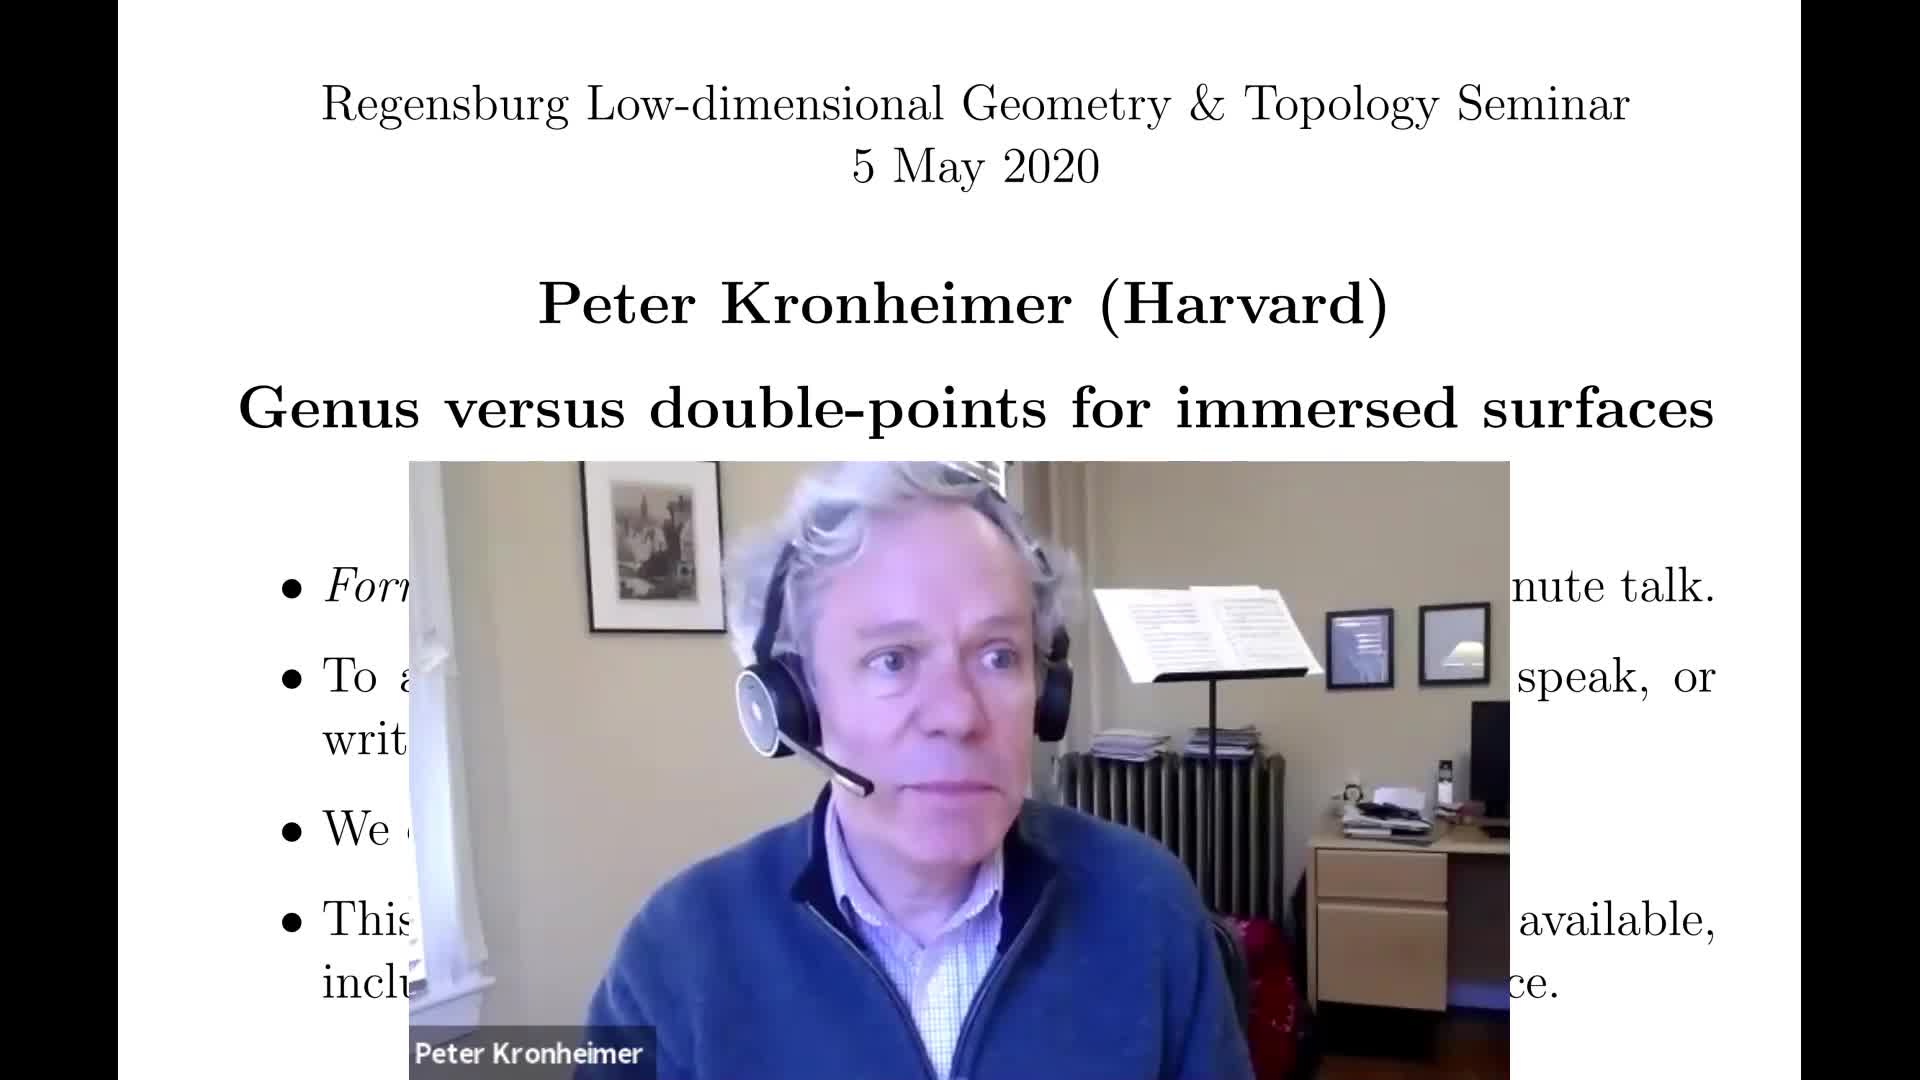 Peter Kronheimer: Genus versus double-points for immersed surfaces (RLGTS, 5 May 2020)